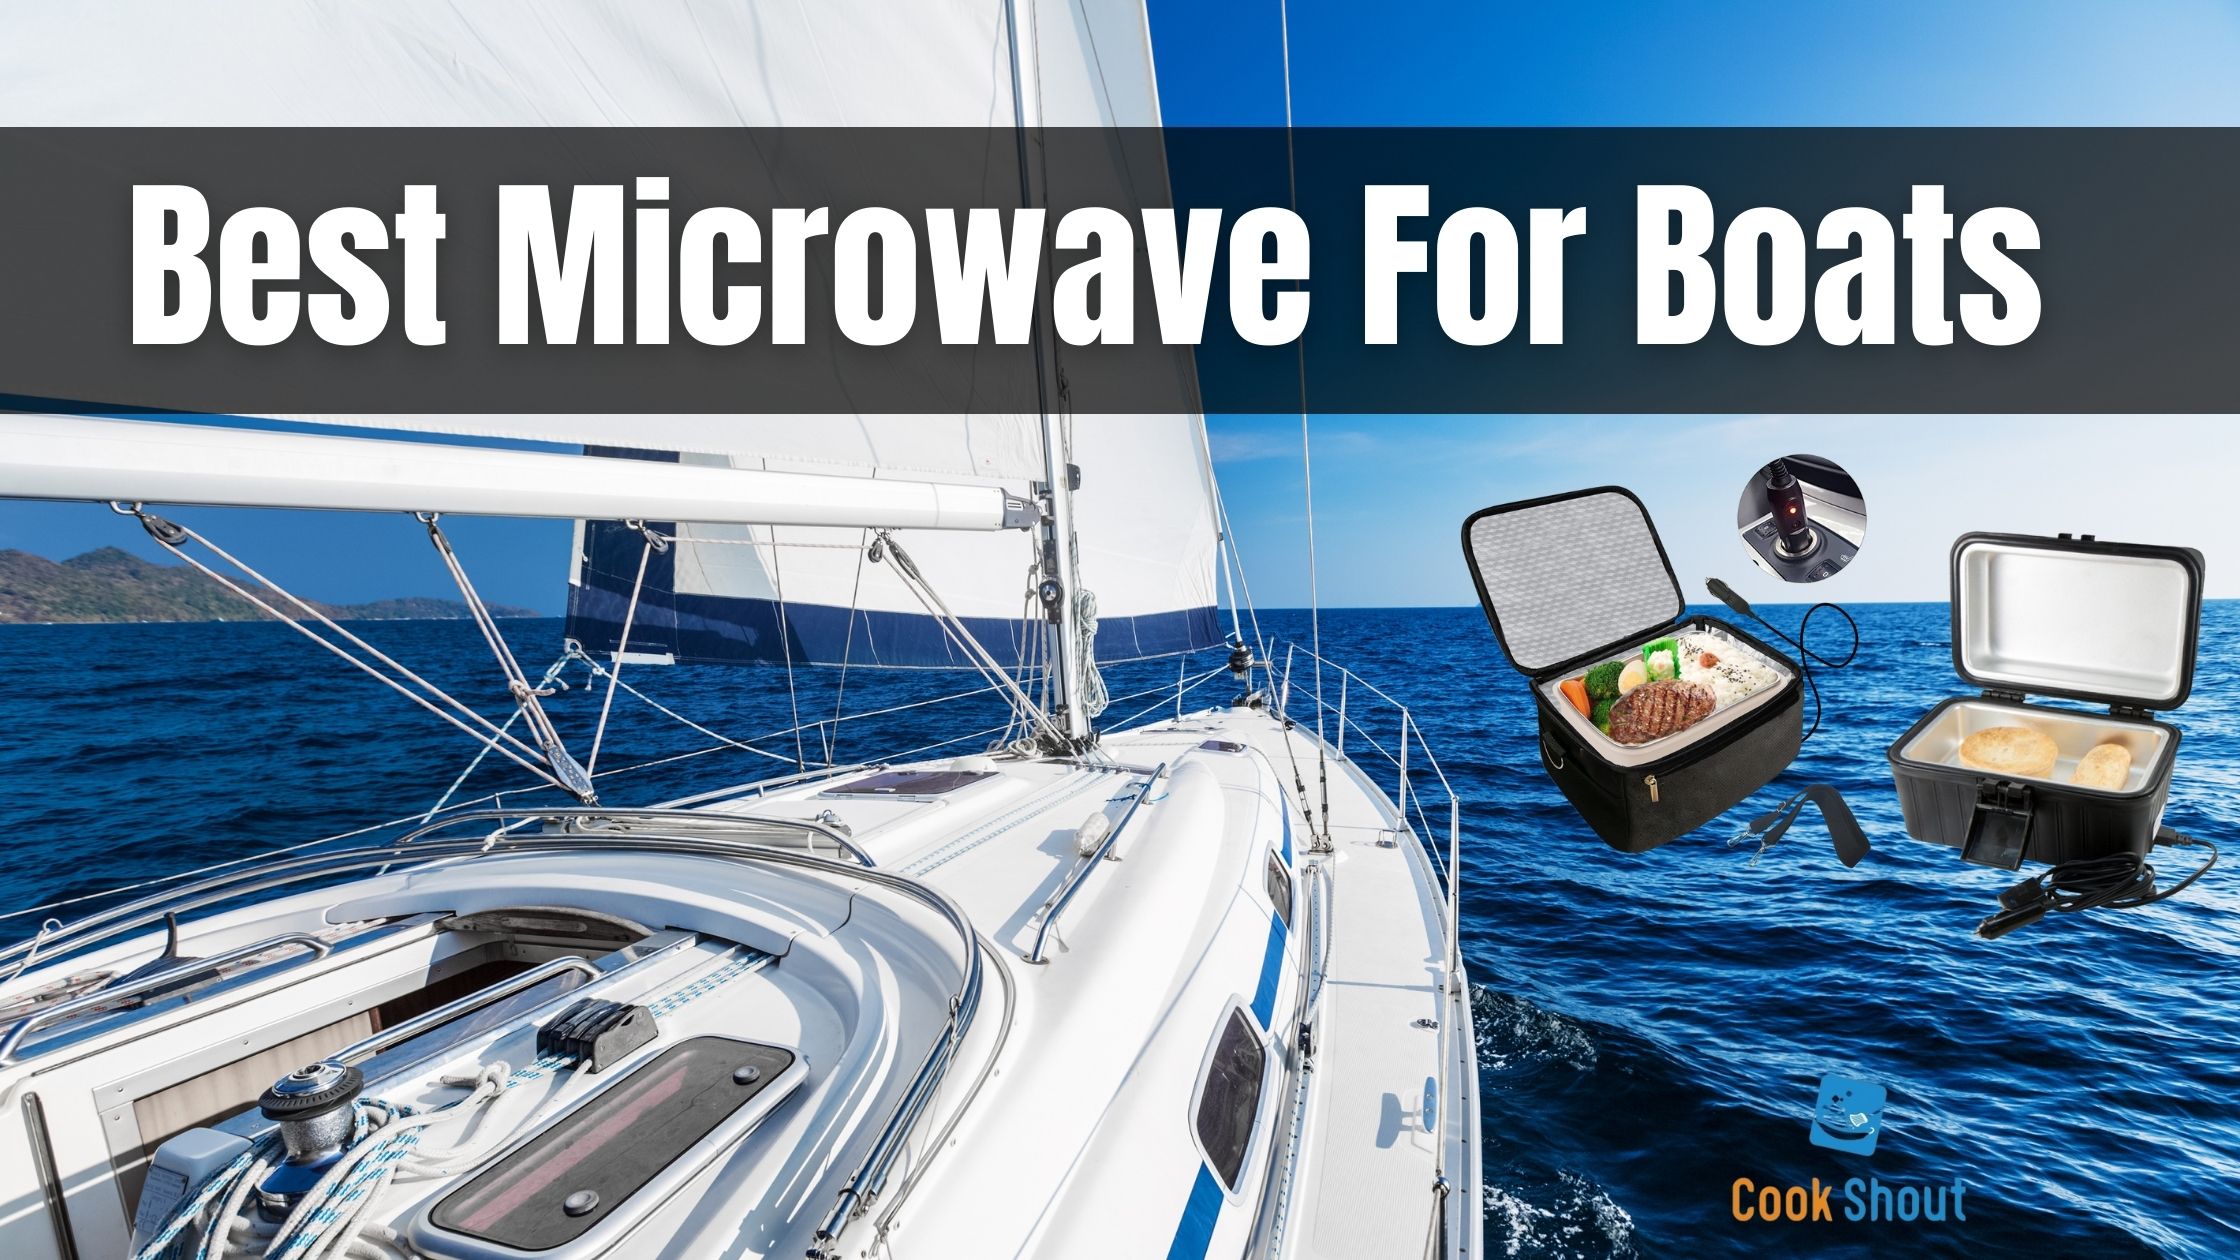 Best Microwave For Boats 2021